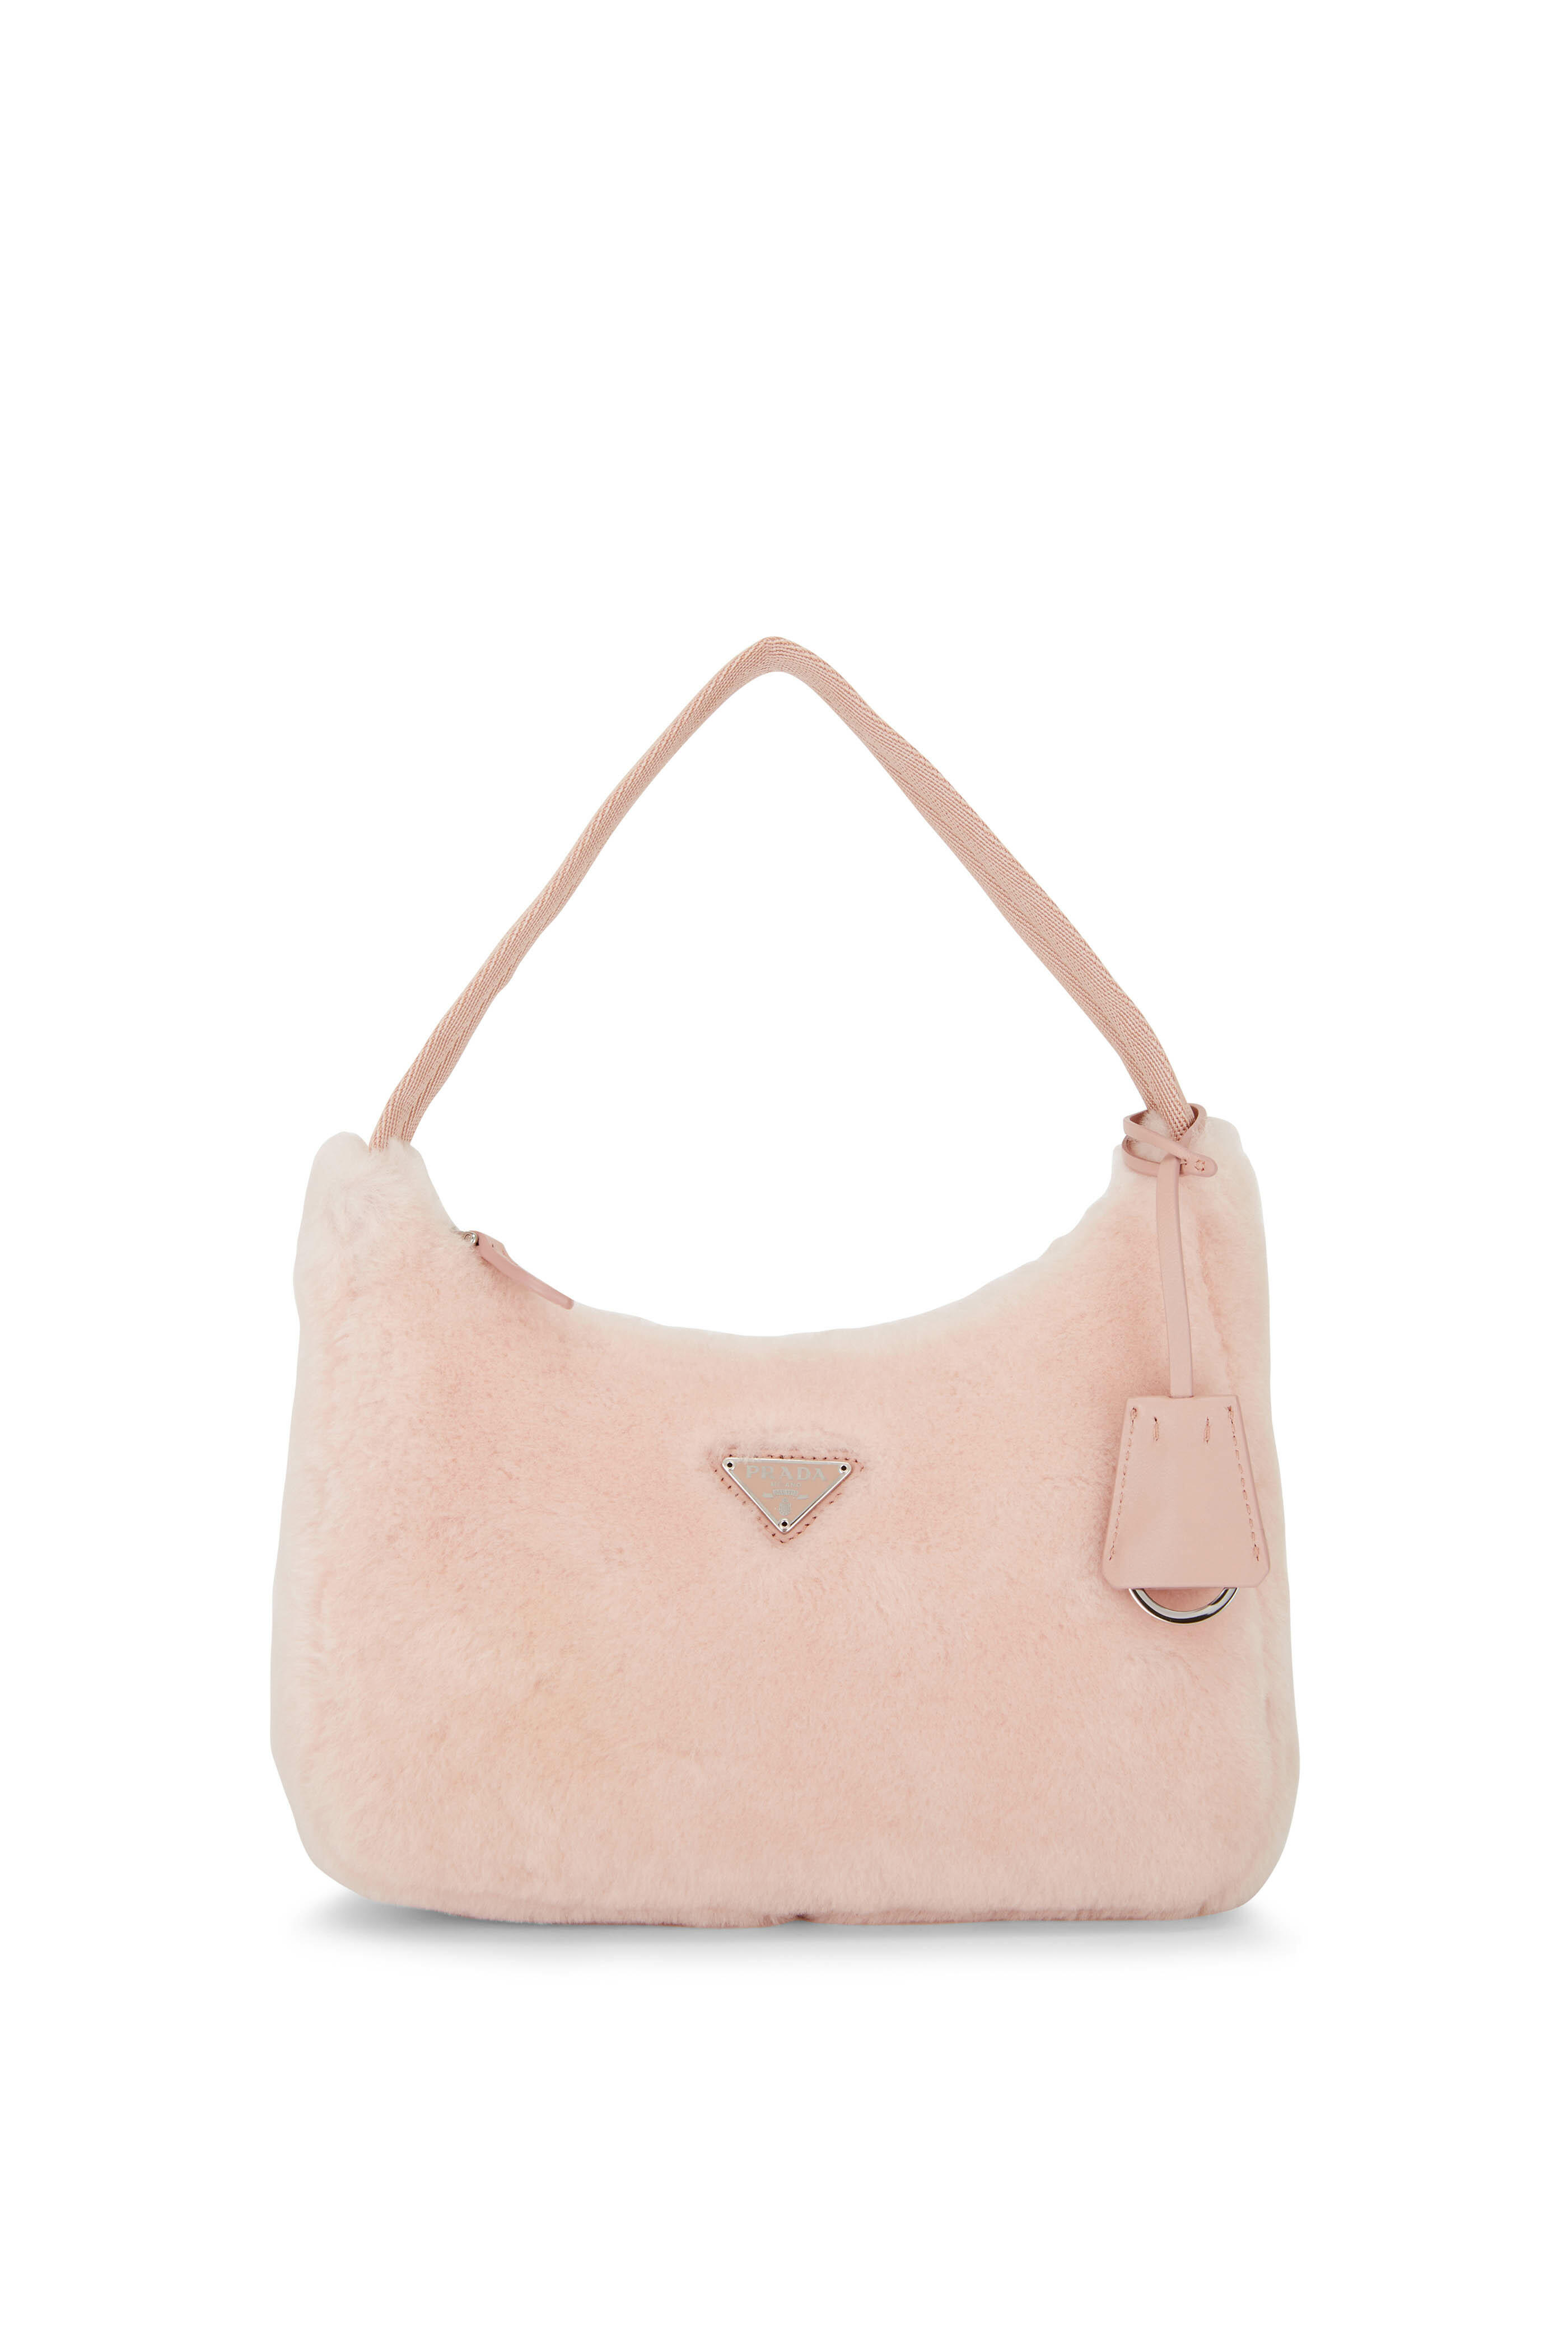 Prada Women's Orchid Pink Re-Edition Shearling Mini Shoulder Bag | by Mitchell Stores